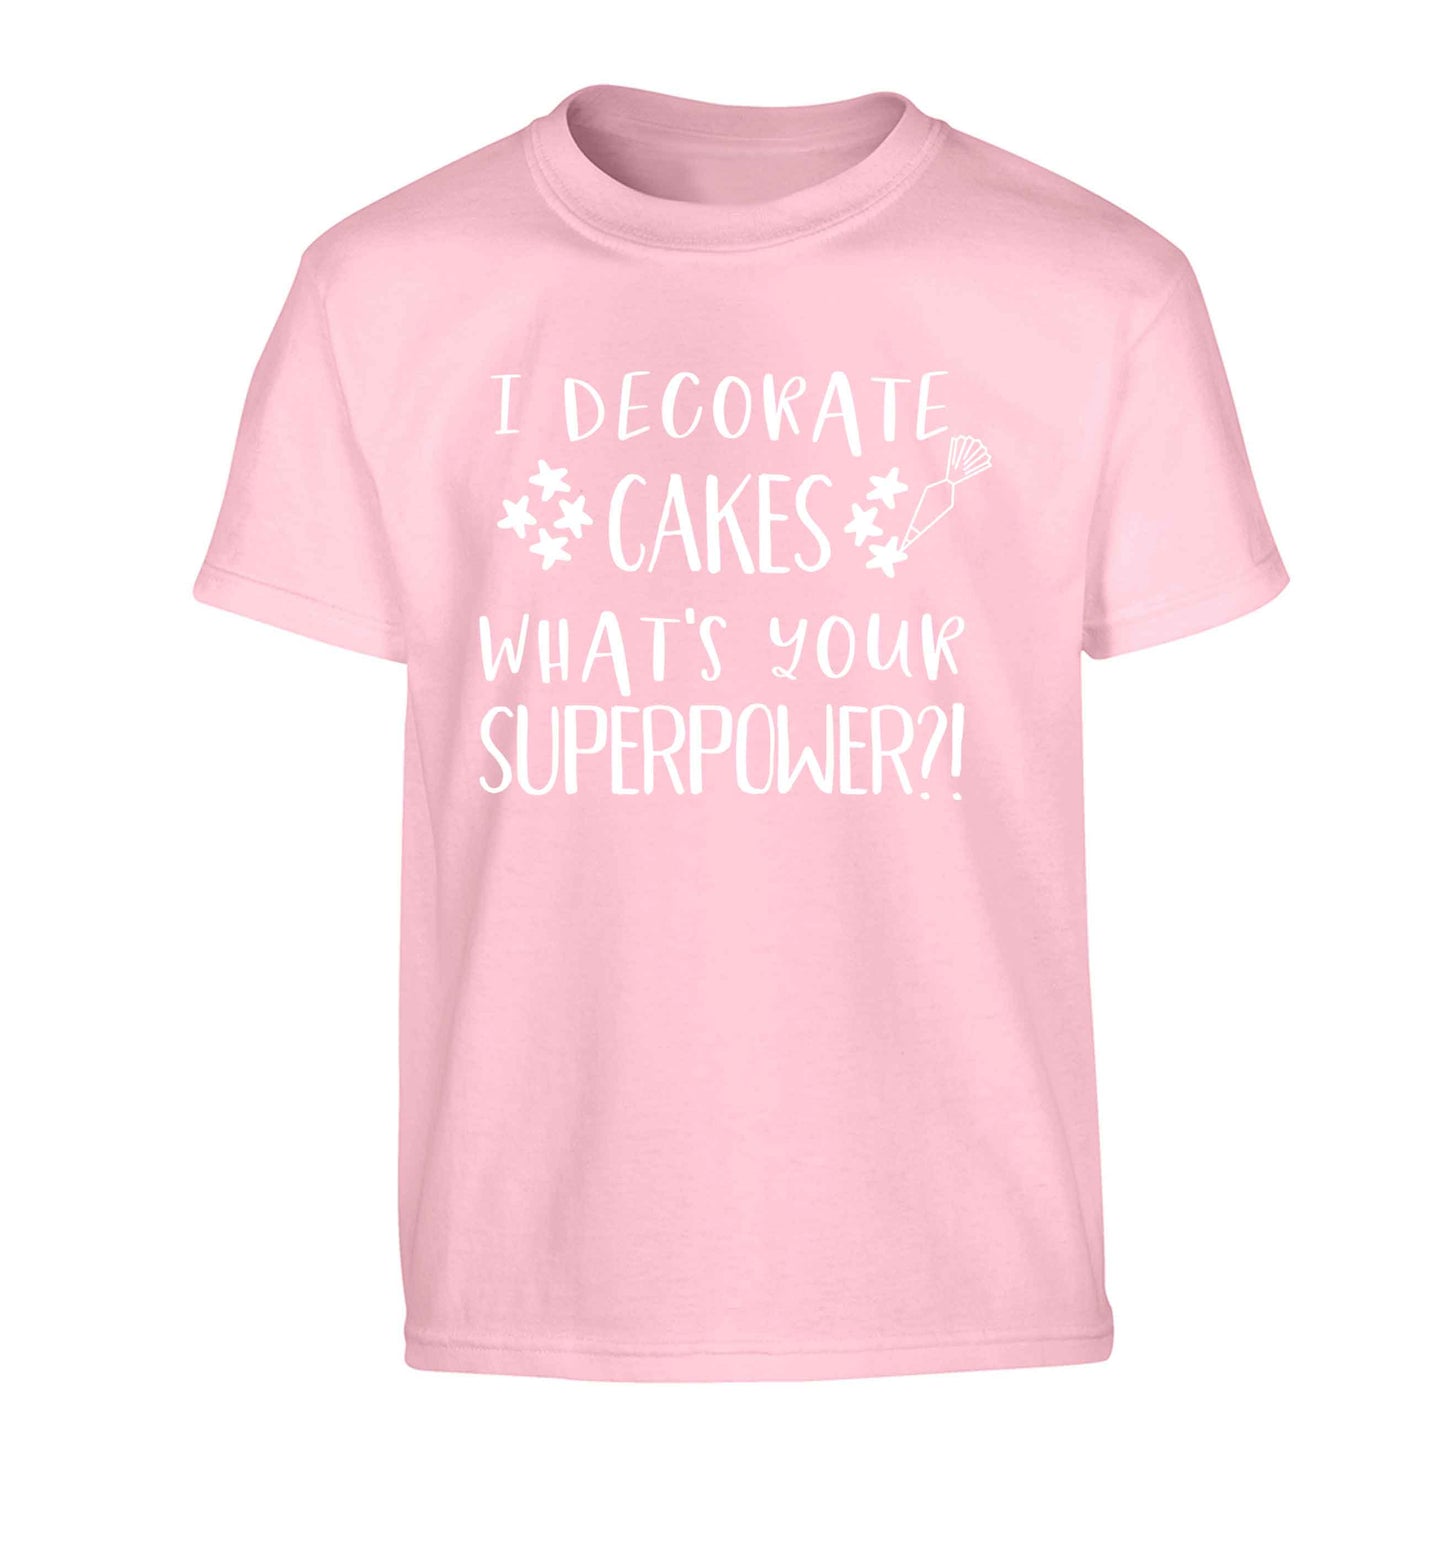 I decorate cakes what's your superpower?! Children's light pink Tshirt 12-13 Years